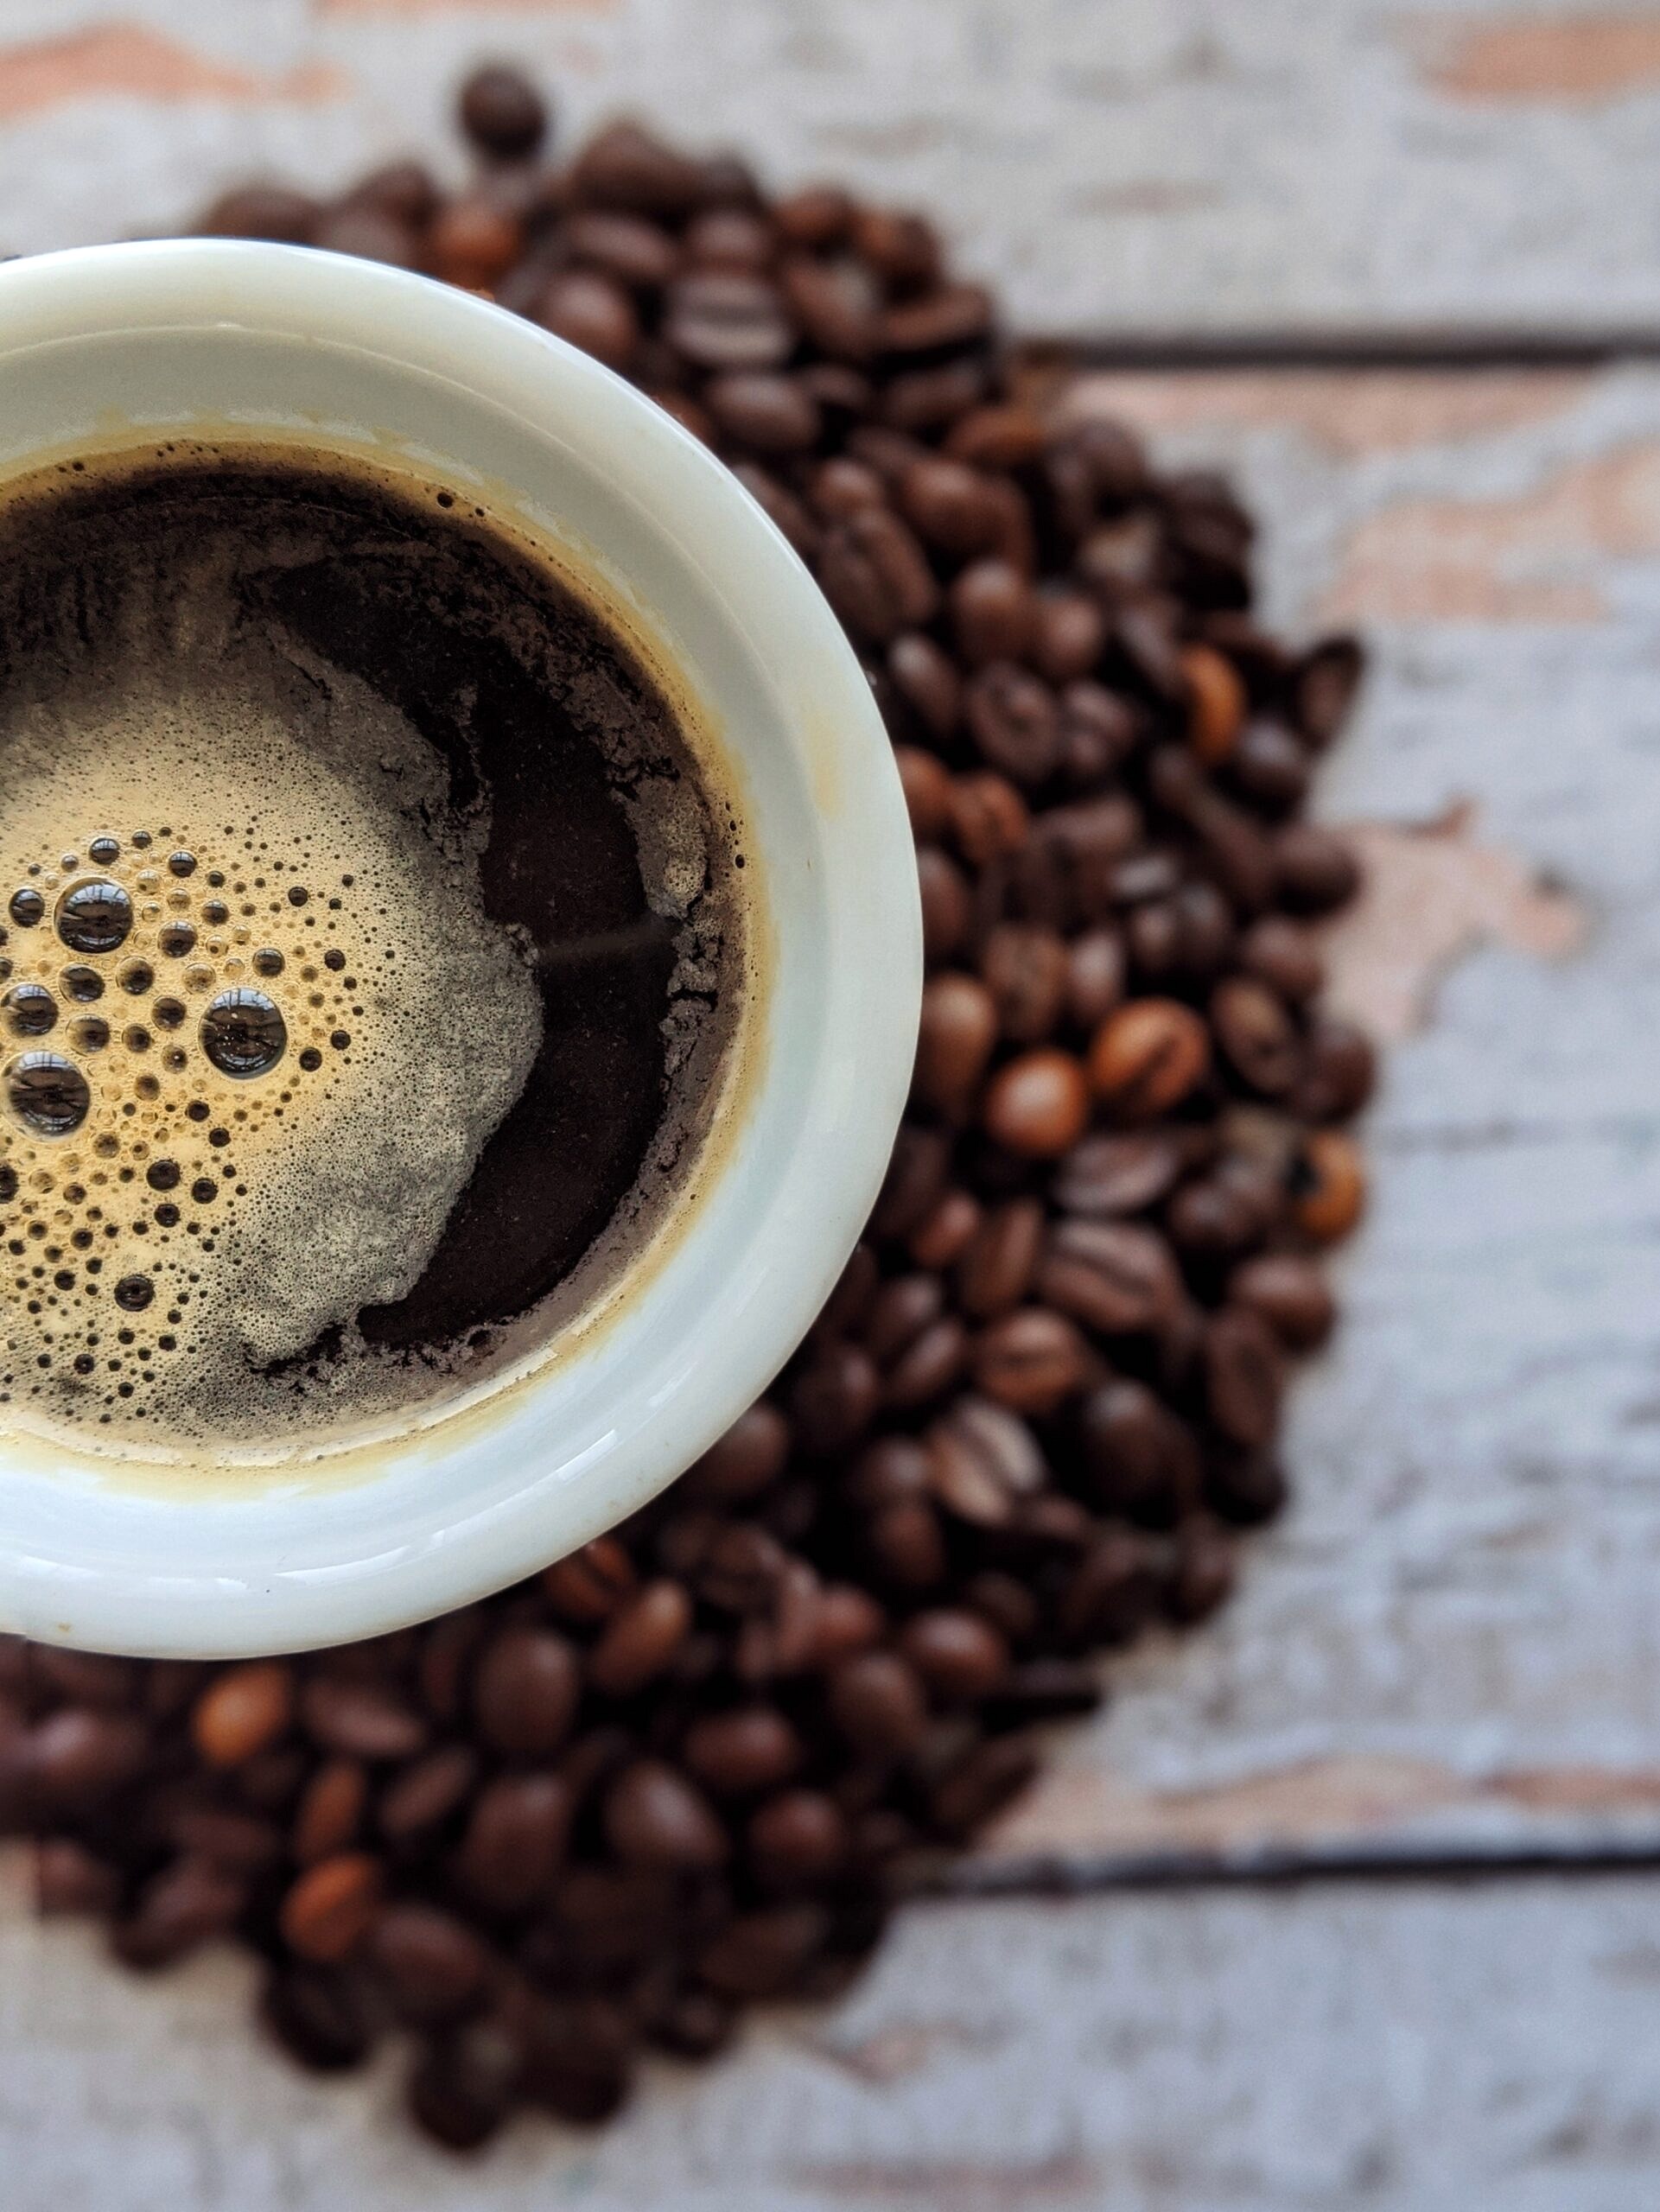 Close up image of black coffee with coffee beans in the background.